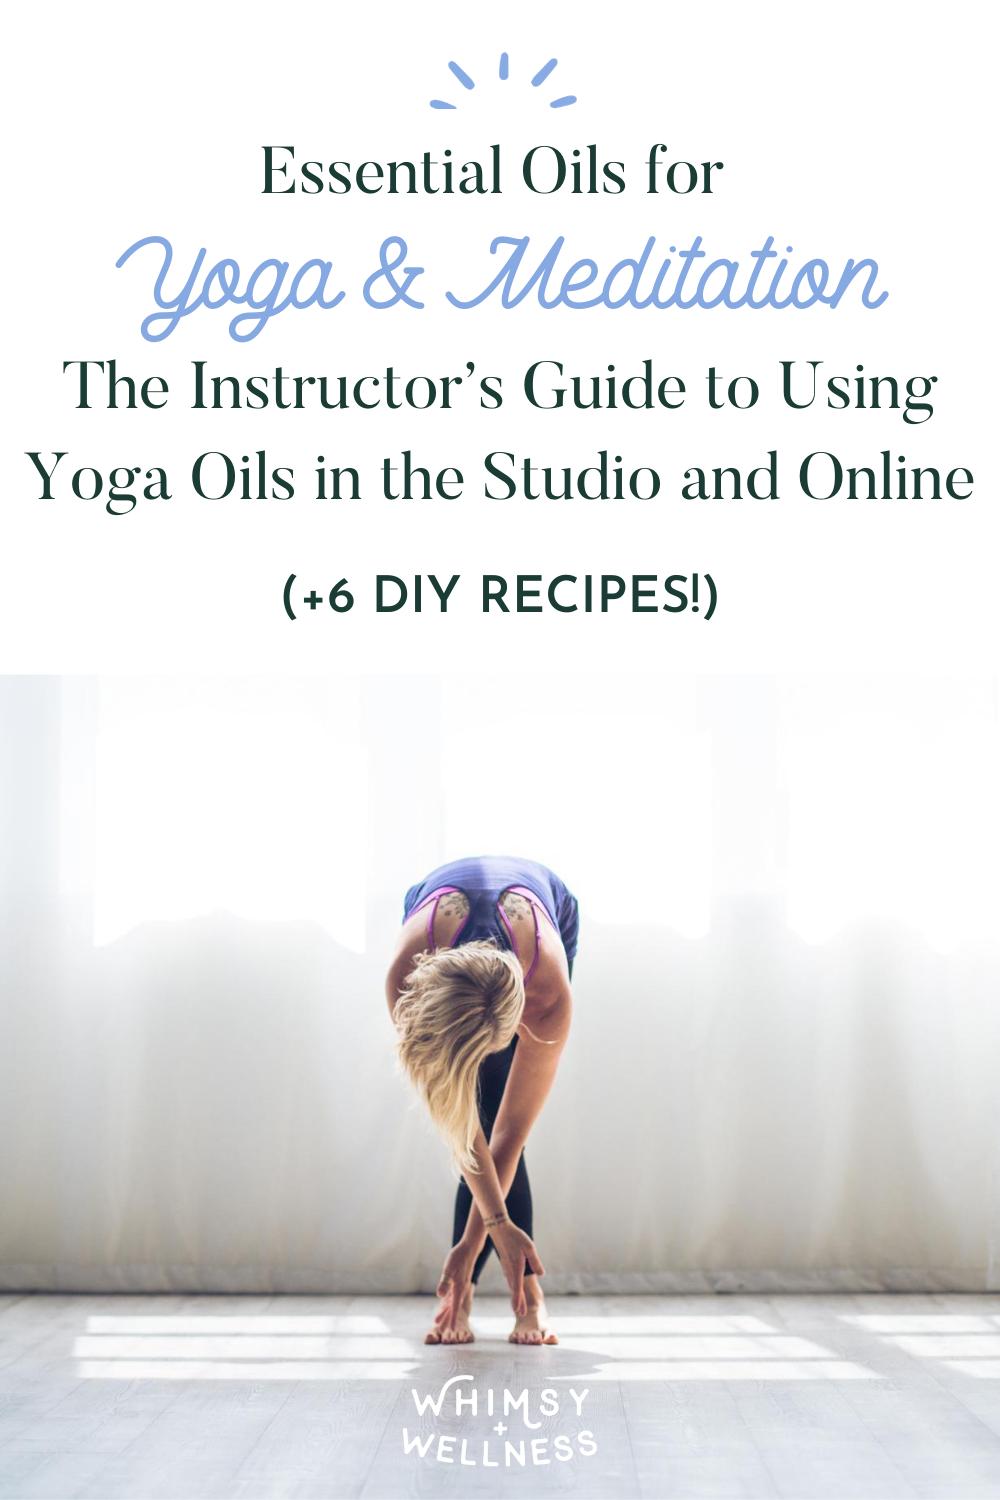 Essential Oils for Yoga & Meditation: the Instructor’s Guide to Using Yoga Oils in the Studio and Online (+6 DIY Recipes!)